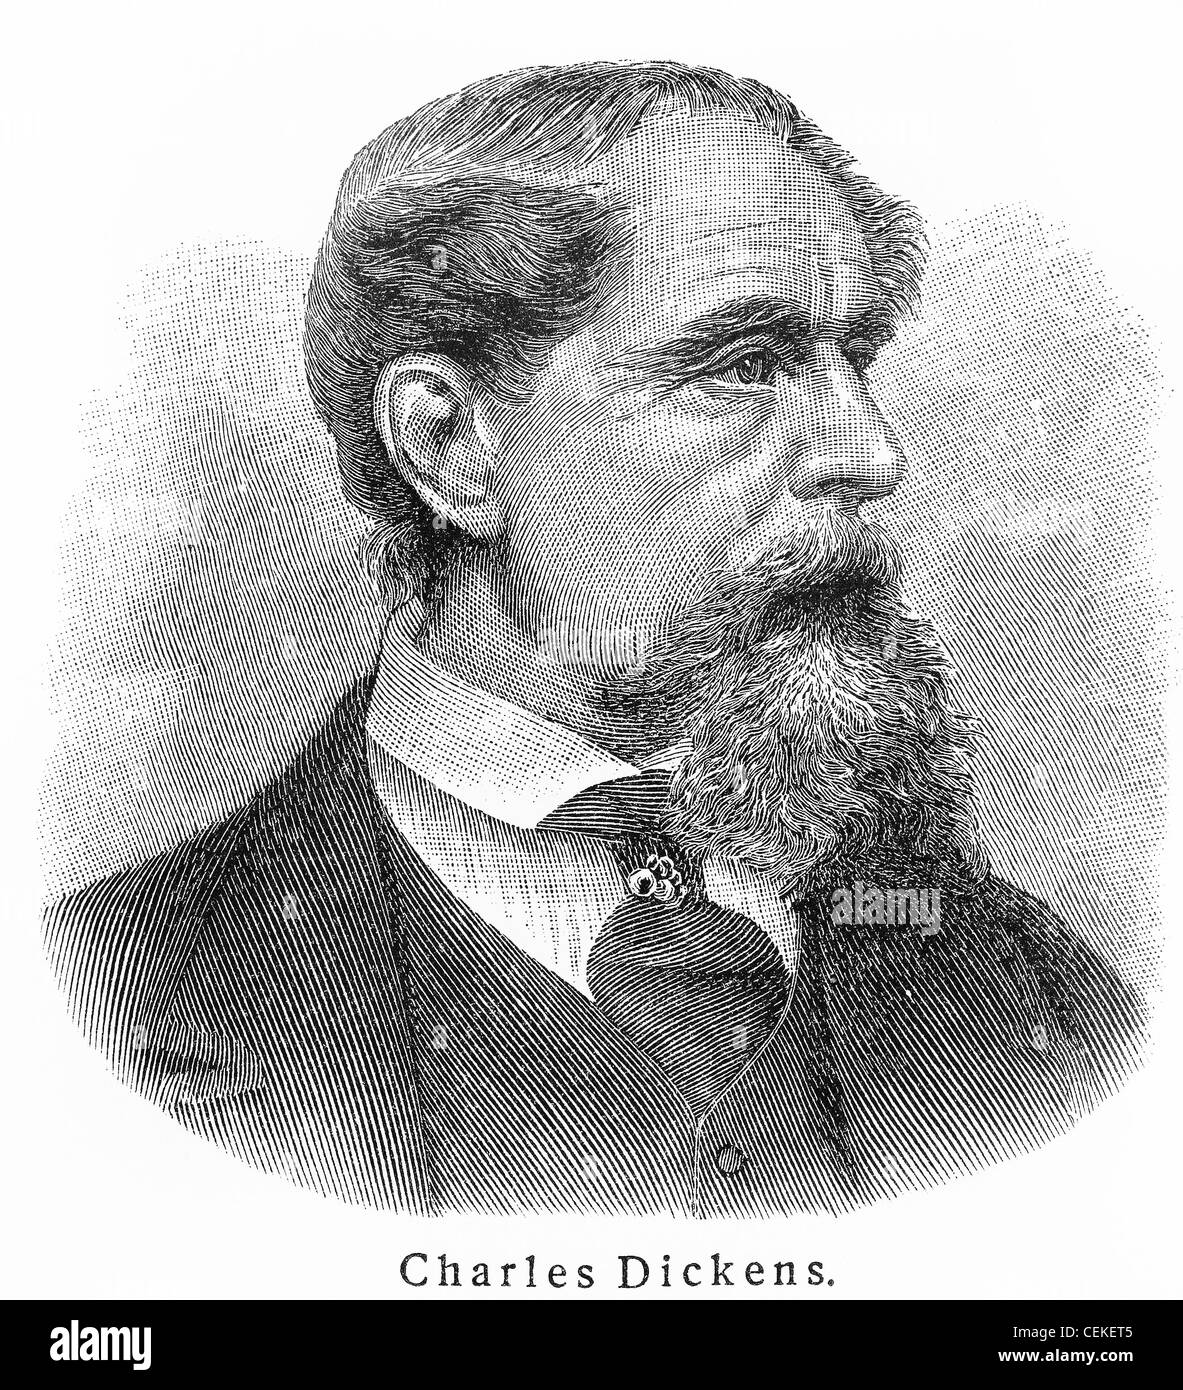 Charles dickens drawing  How to draw Charles dickens drawing step by step   Novelist  YouTube